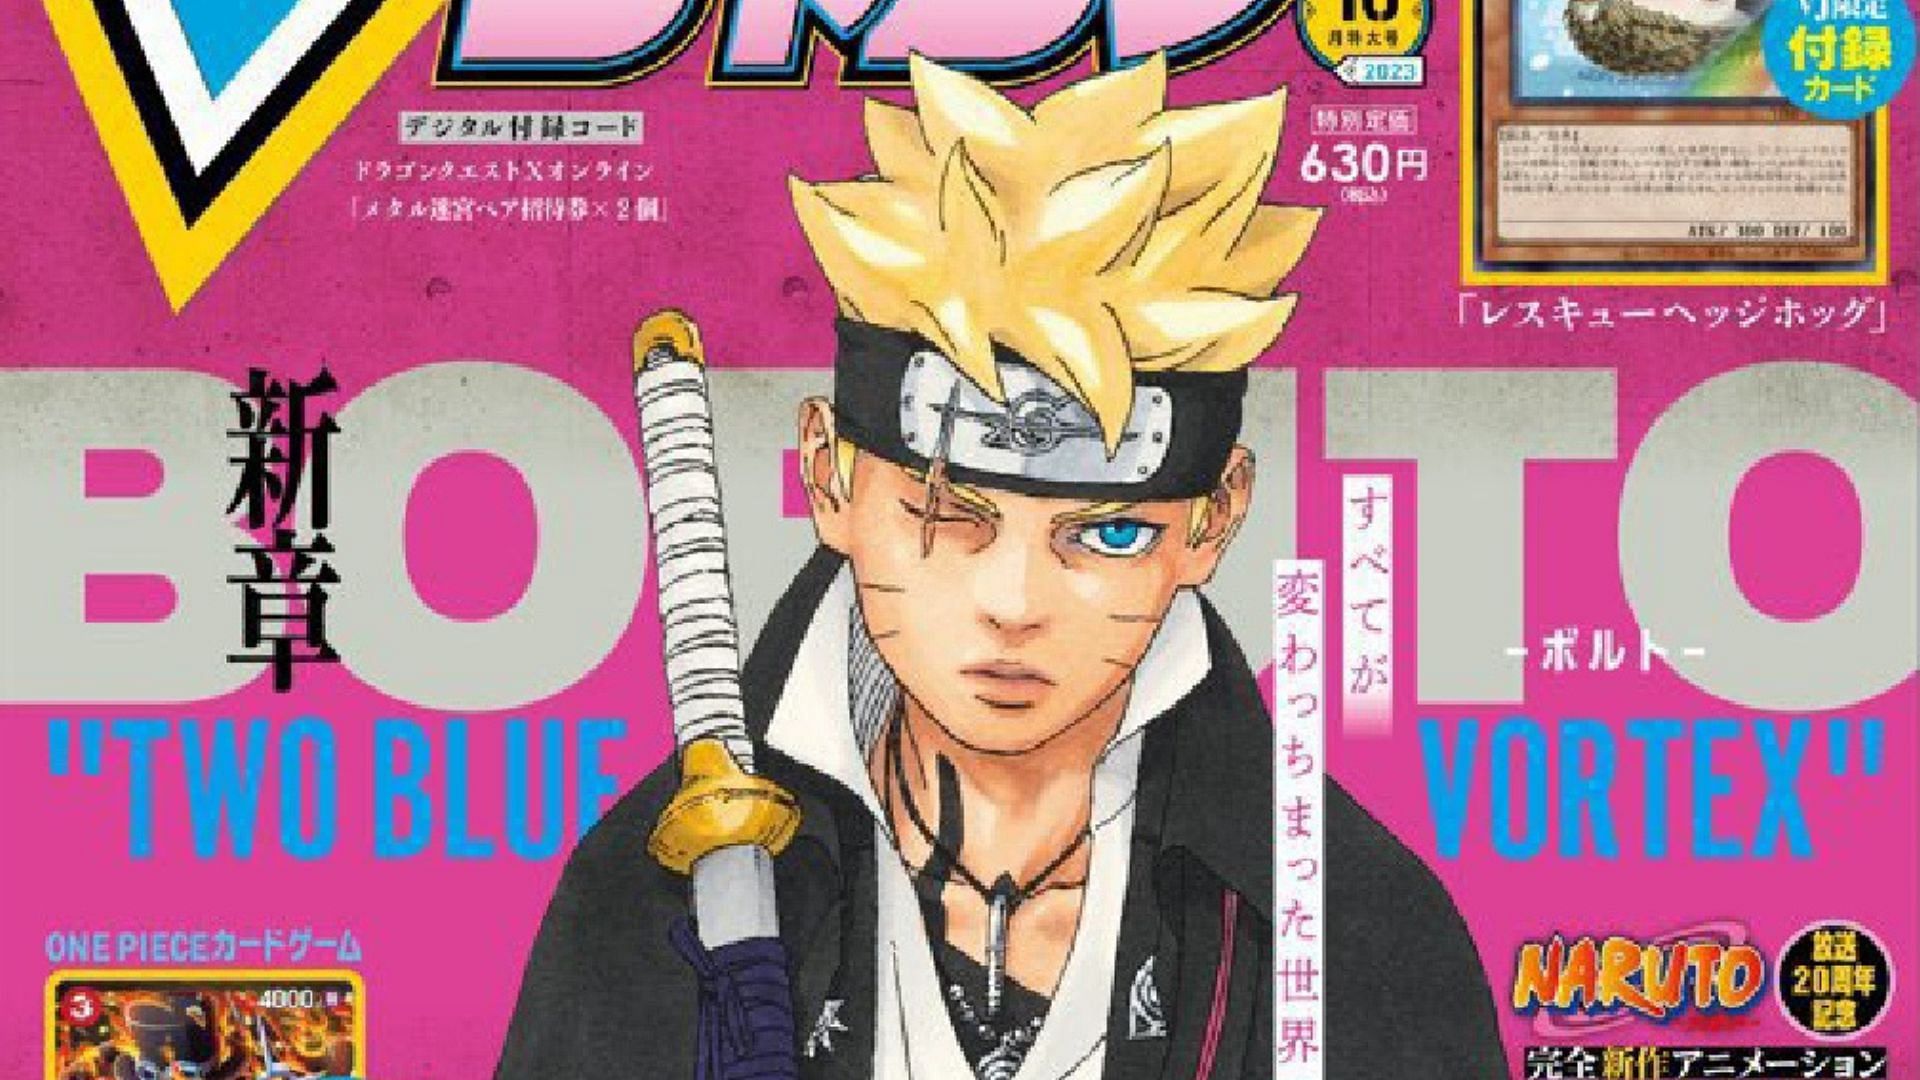 Boruto timeskip could generate hype greater than One Piece Gear 5